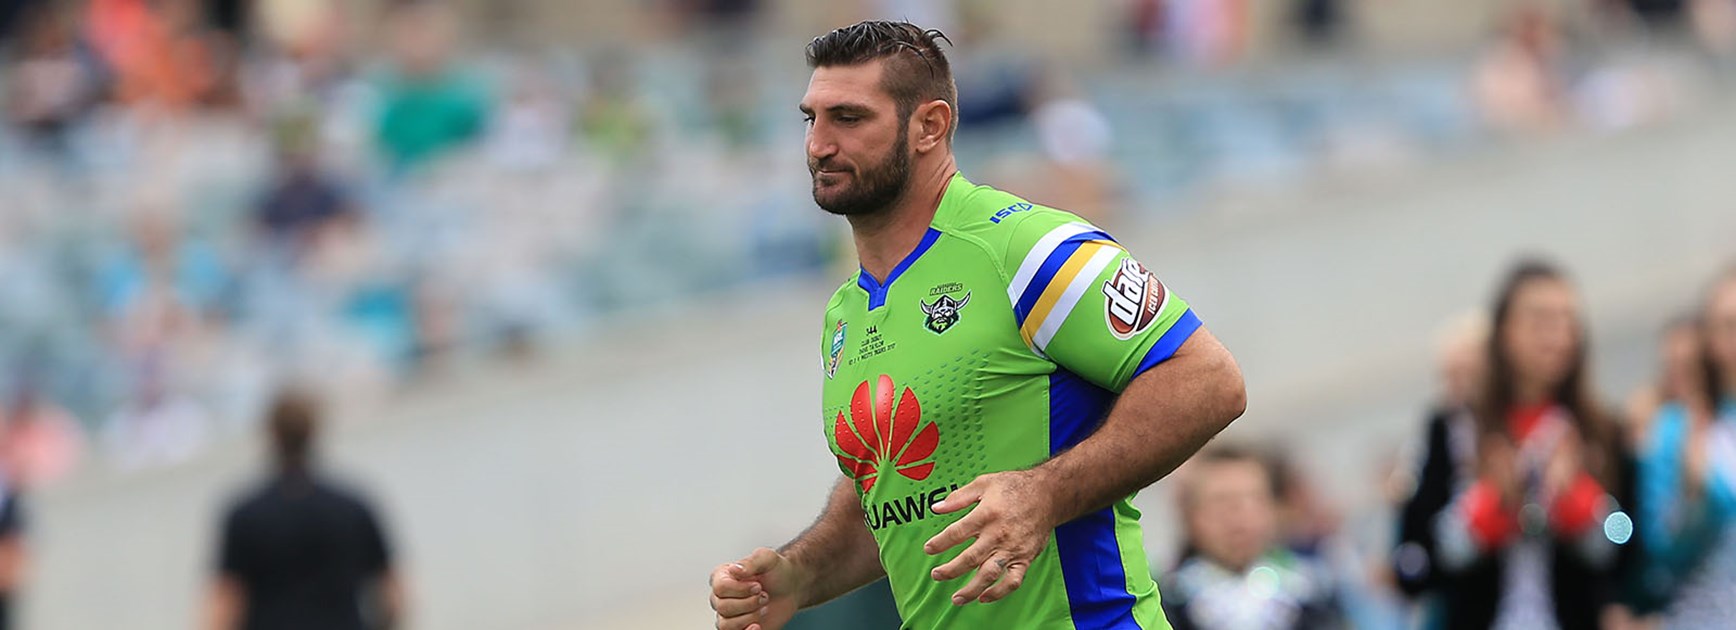 David Taylor makes his debut for the Raiders against the Wests Tigers in Round 3.